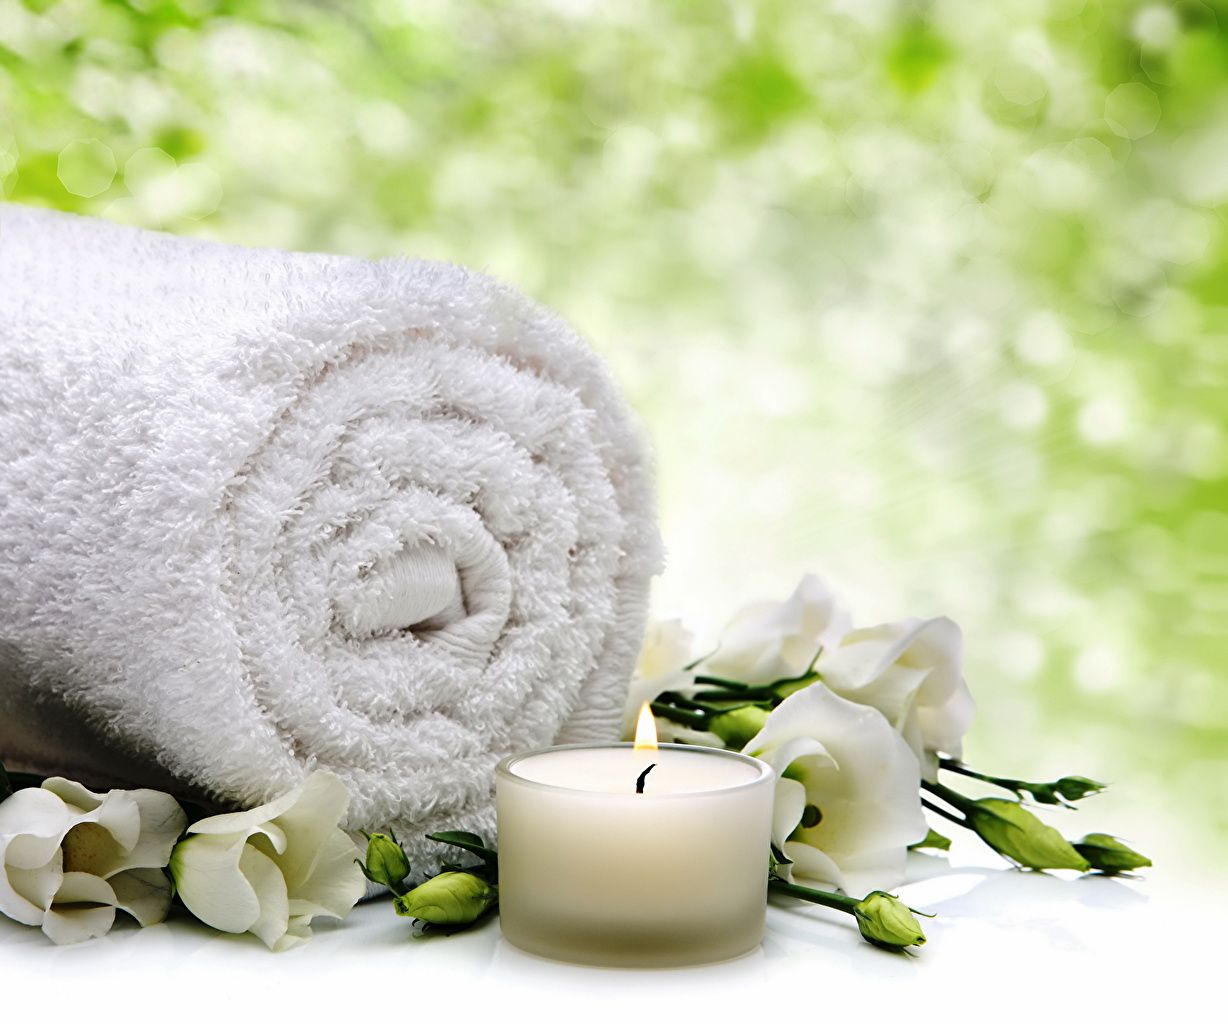 Image Spa relax, bath towel Towel Candles